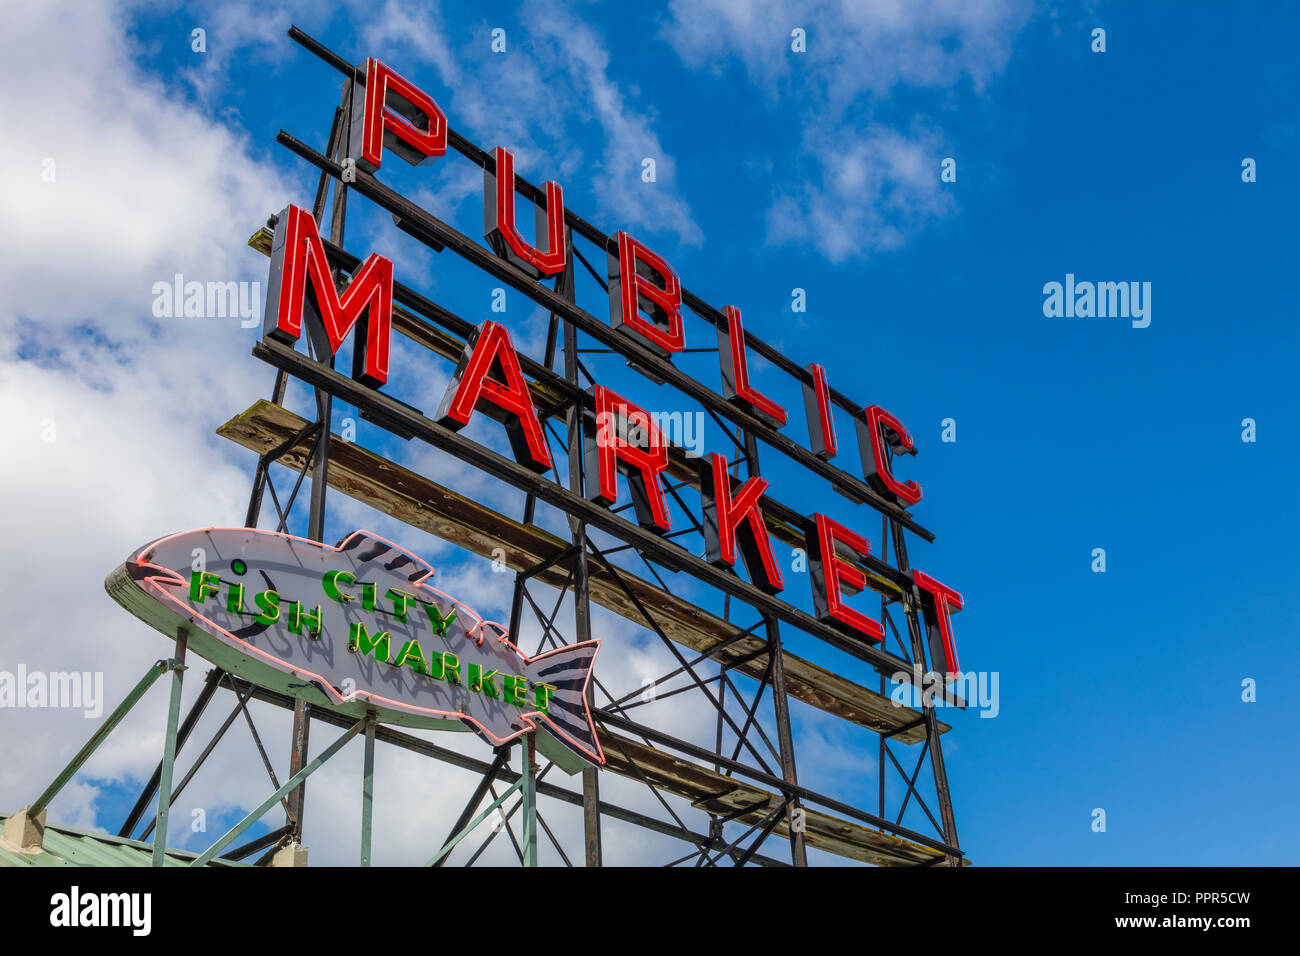 Pike Place Market isign n Seattle Washington one of the oldest continuously operated public farmers' markets in the United States Stock Photo